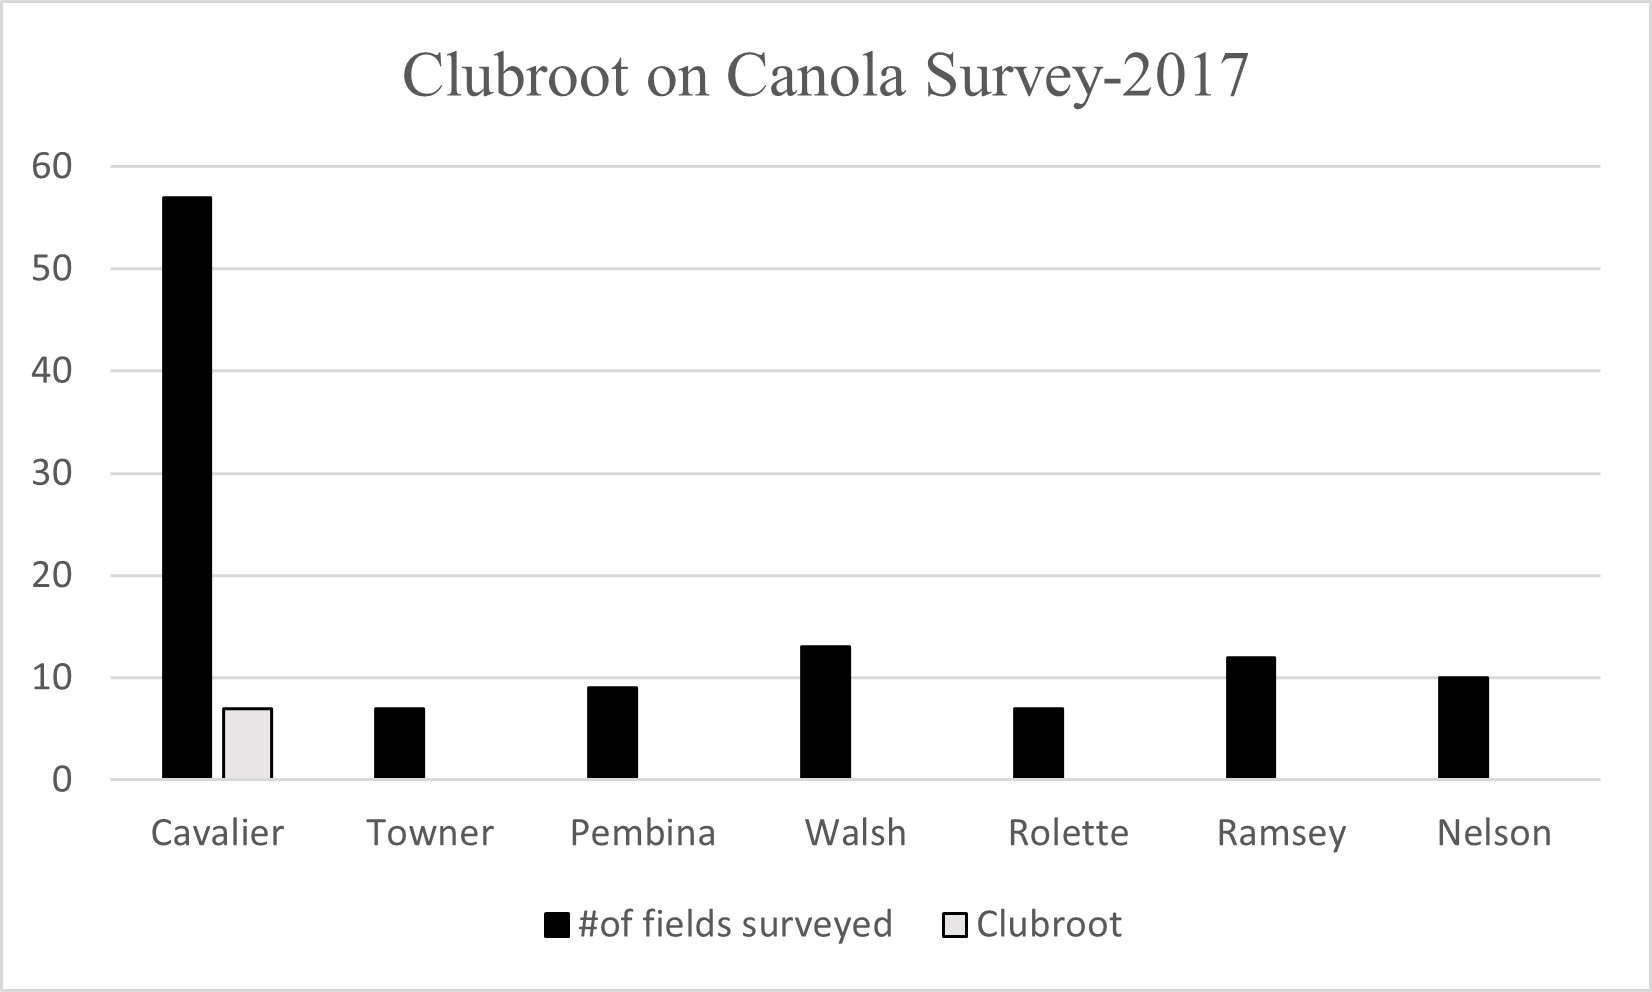 Fields surveyed in 2017 for prevalence of clubroot over 8 counties.